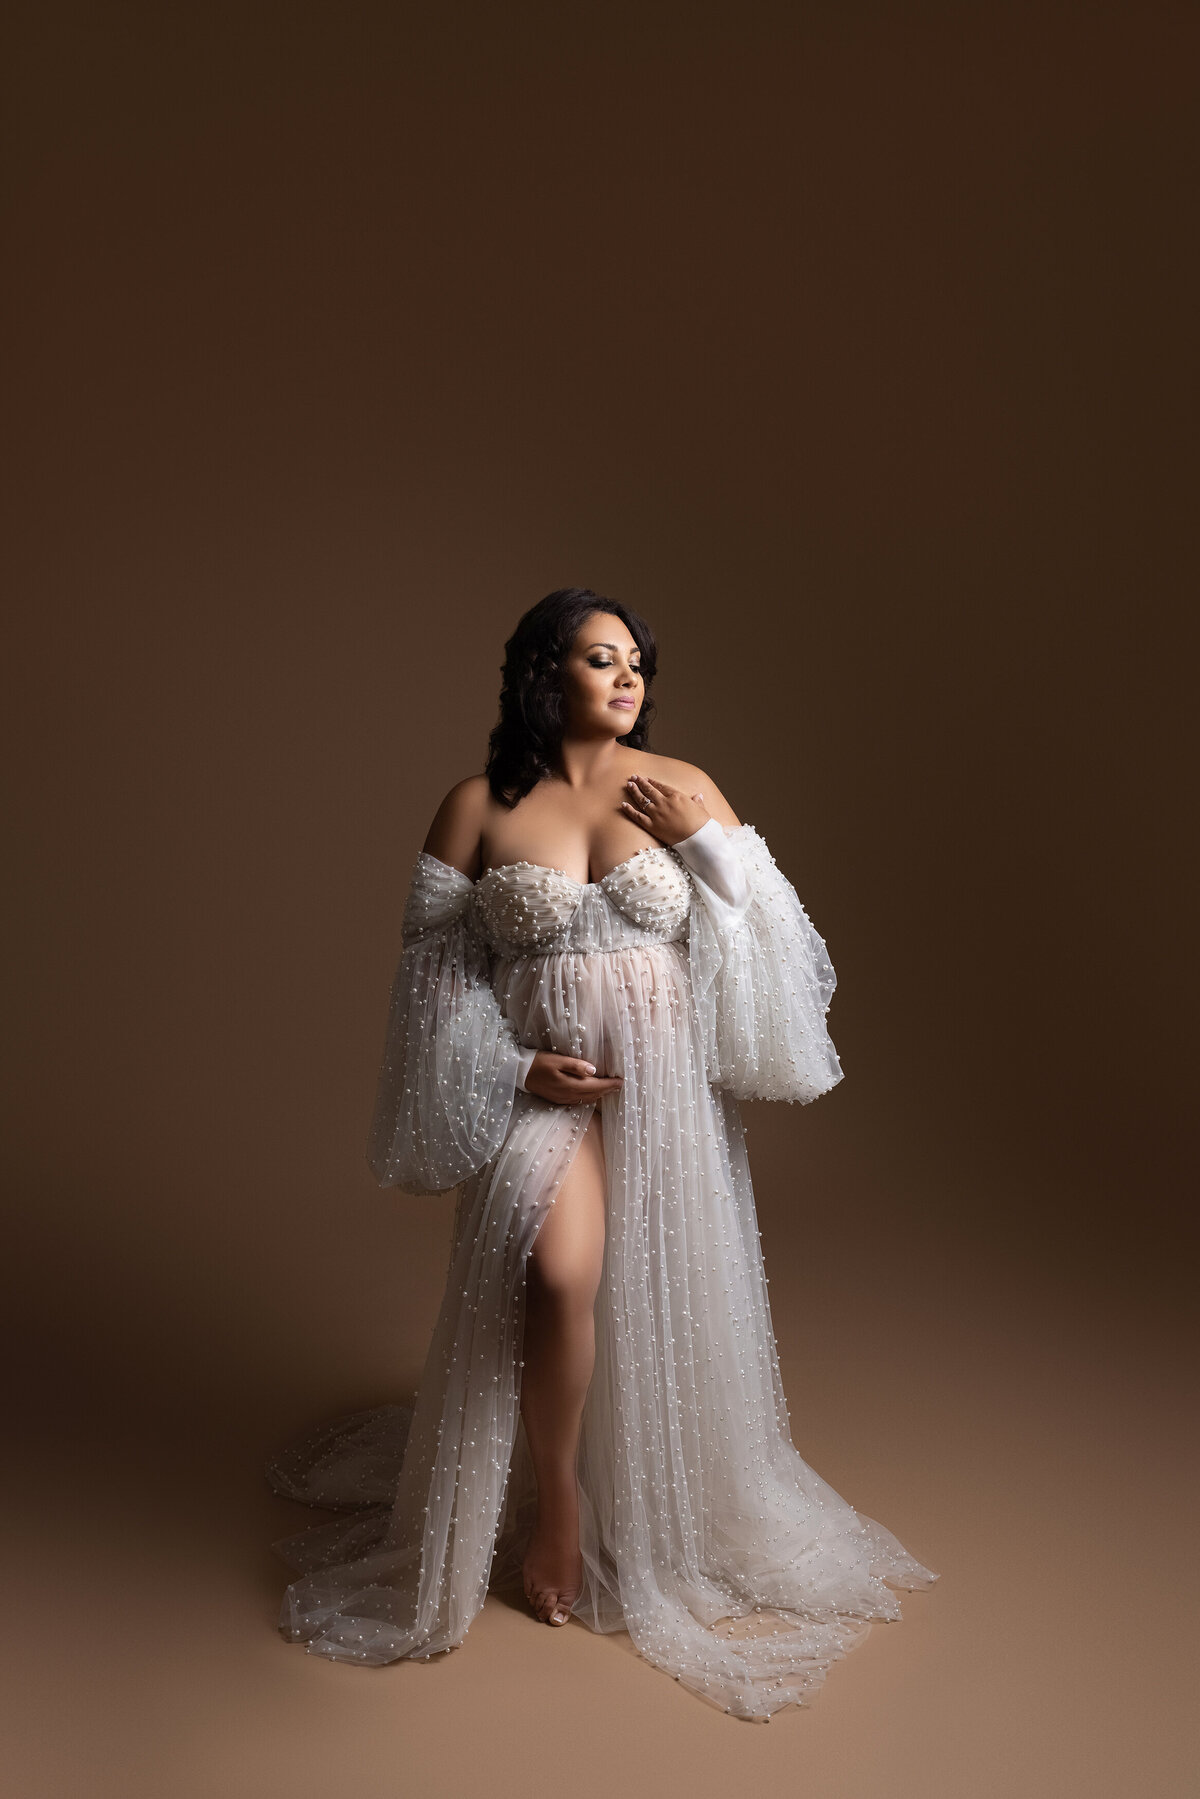 Maternity photos captured by top London, ON Maternity Photographer Amy Perrin-Ogg.  Expectant mom in elaborately beaded cream coloured gown is standing facing the camera with one hand touching her shoulder and the other hand under her bump. Her eyes are closed and head positioned toward soft light.